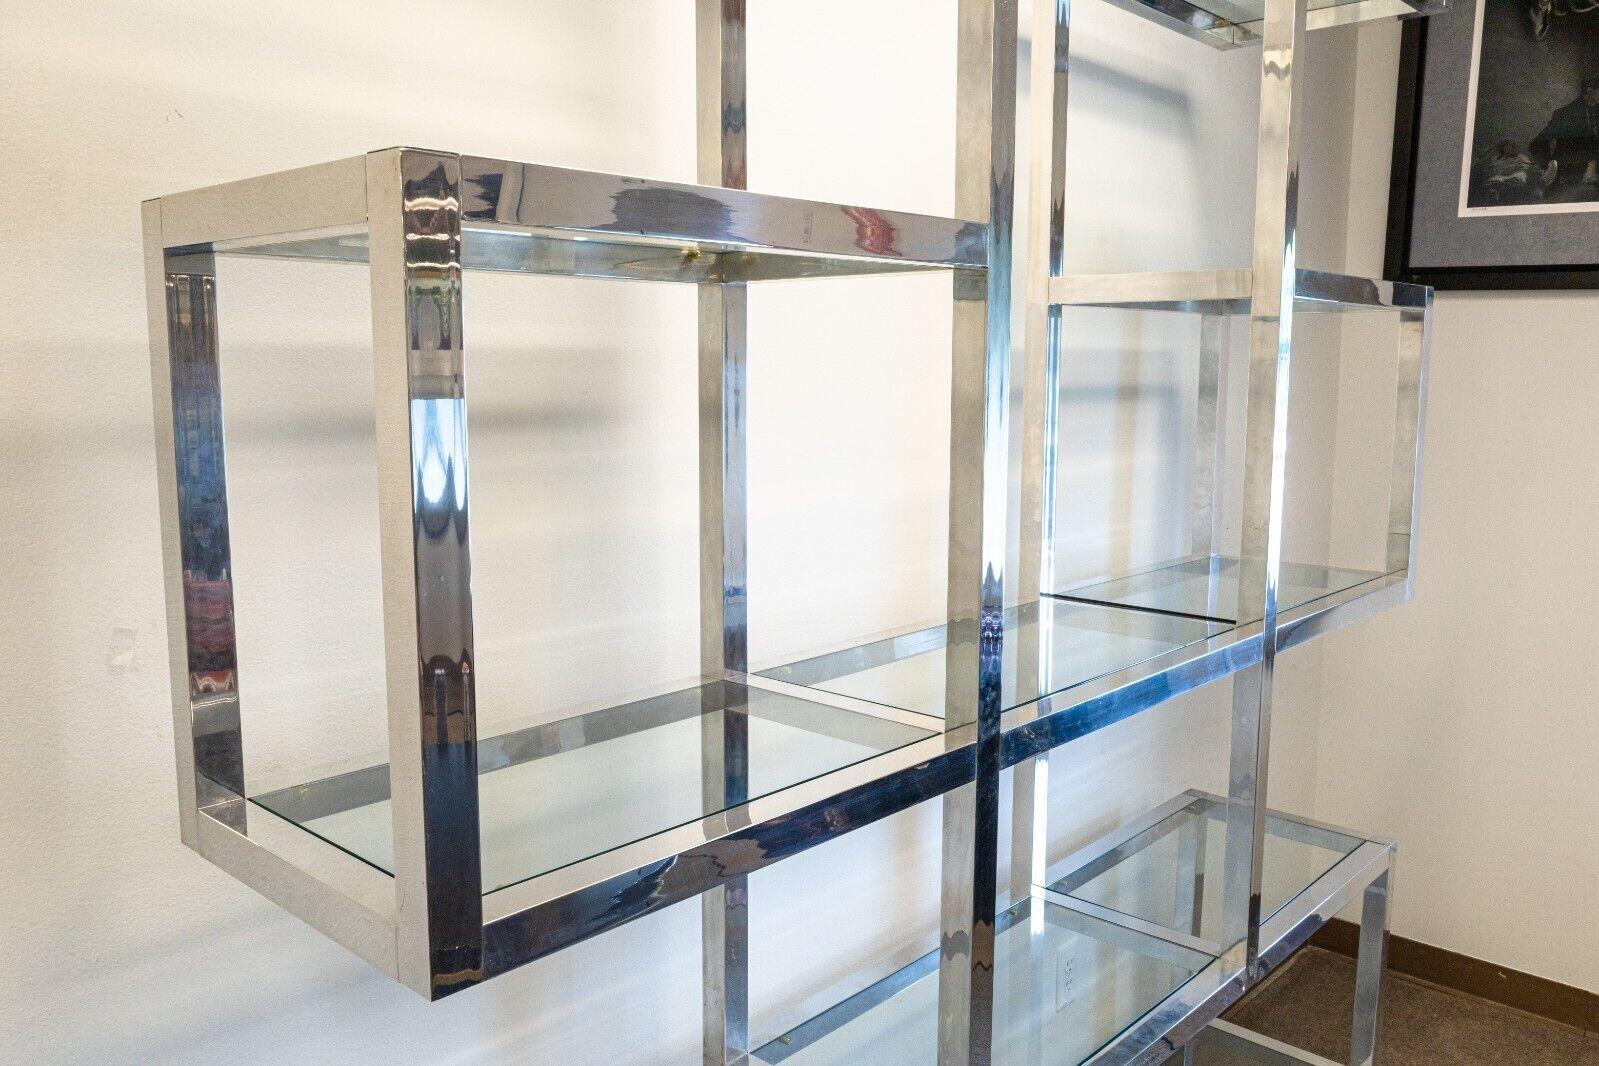 Milo Baughman Style Large Chrome and Glass Floating Etagere Shelving Wall Unit In Good Condition For Sale In Keego Harbor, MI